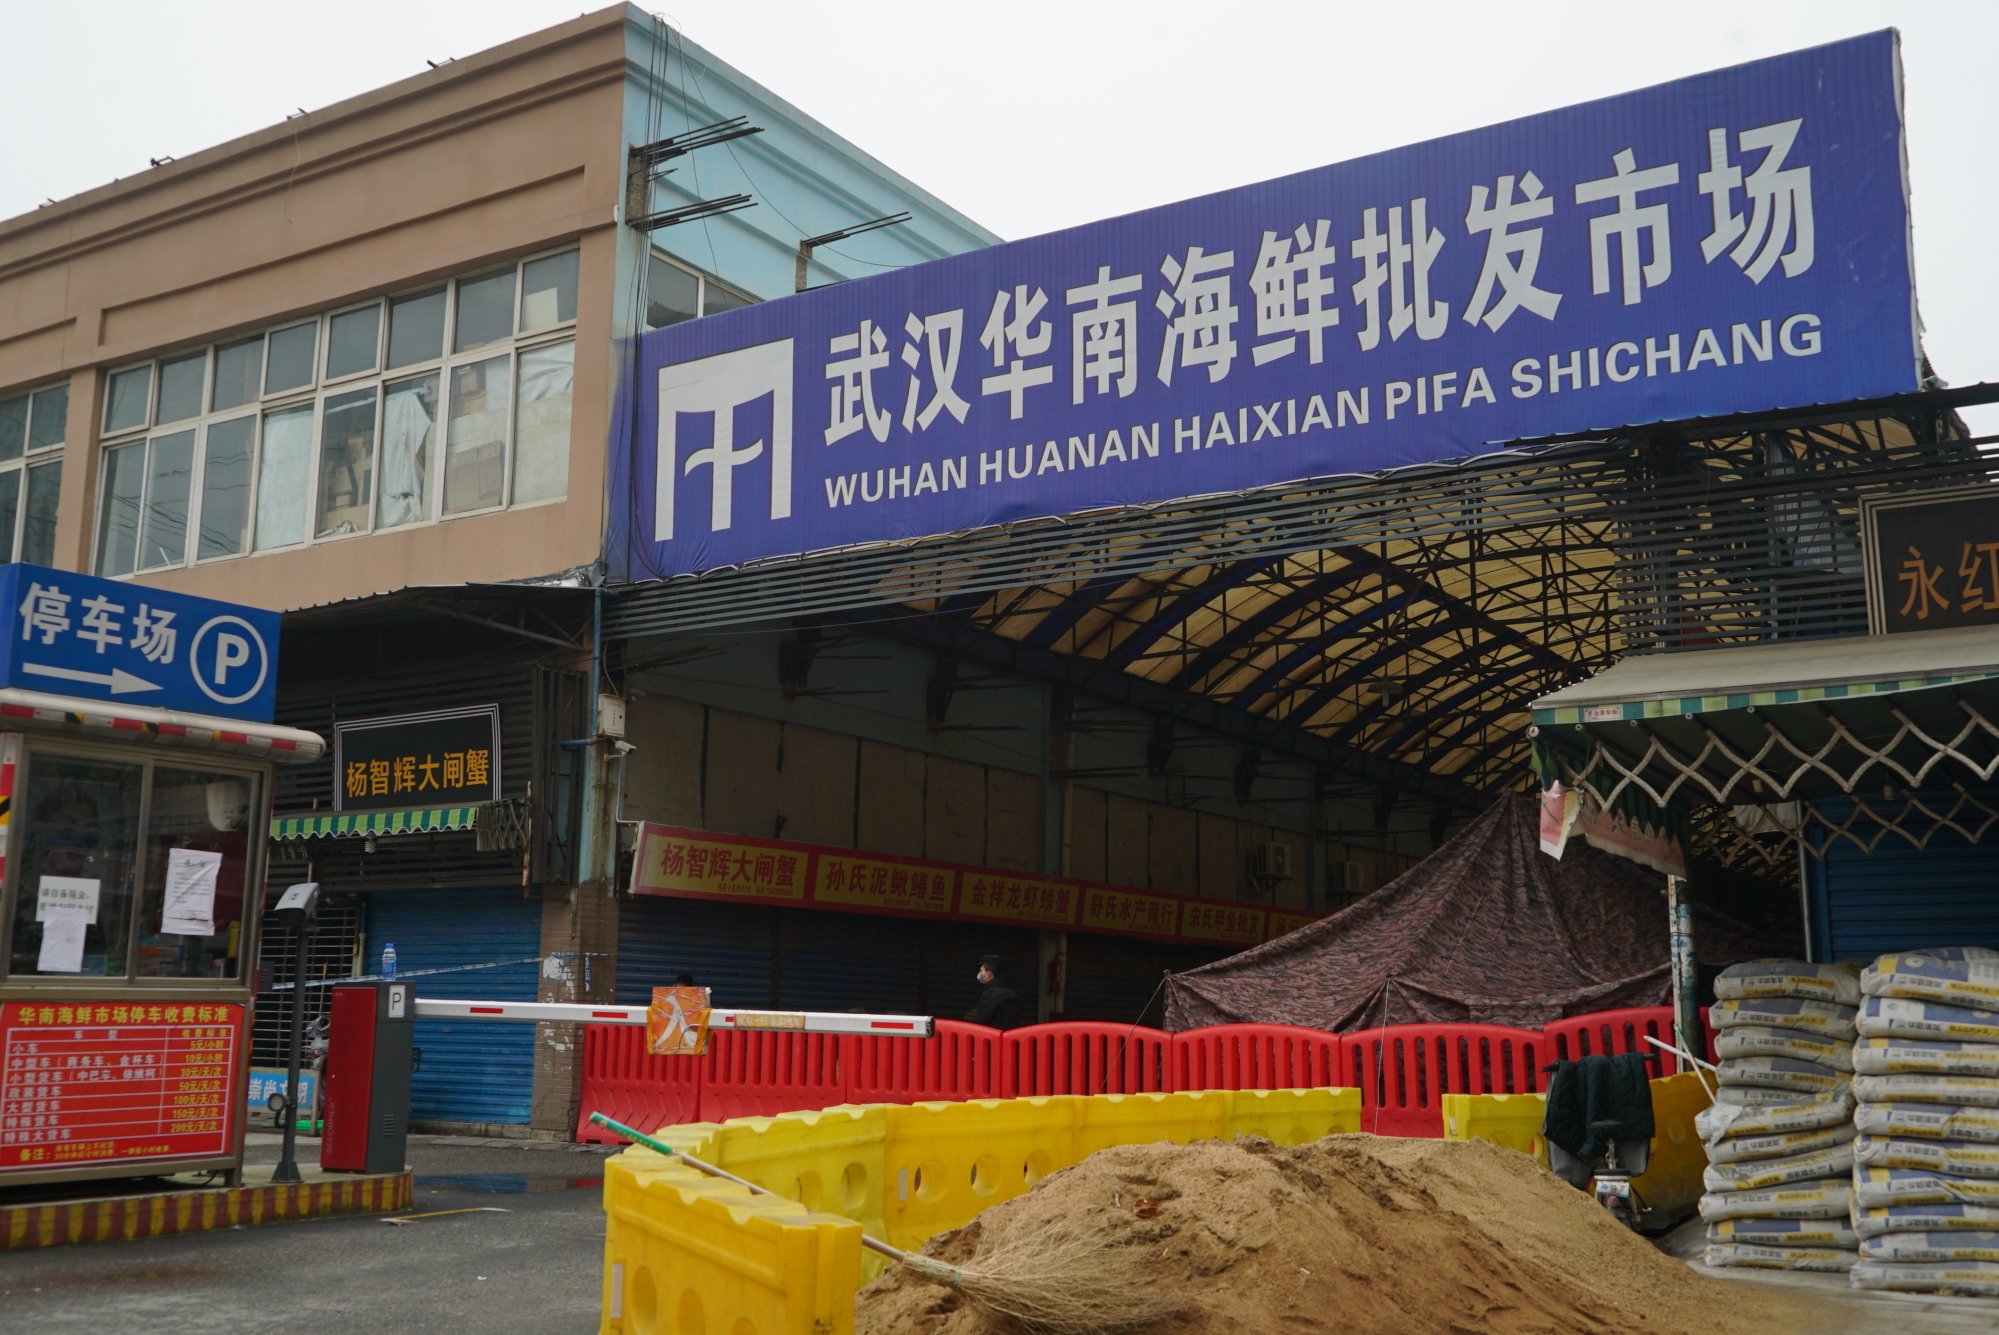 The Huanan Seafood Wholesale Market sits closed in Wuhan in central China’s Hubei province in January 21, 2020. Photo: AP